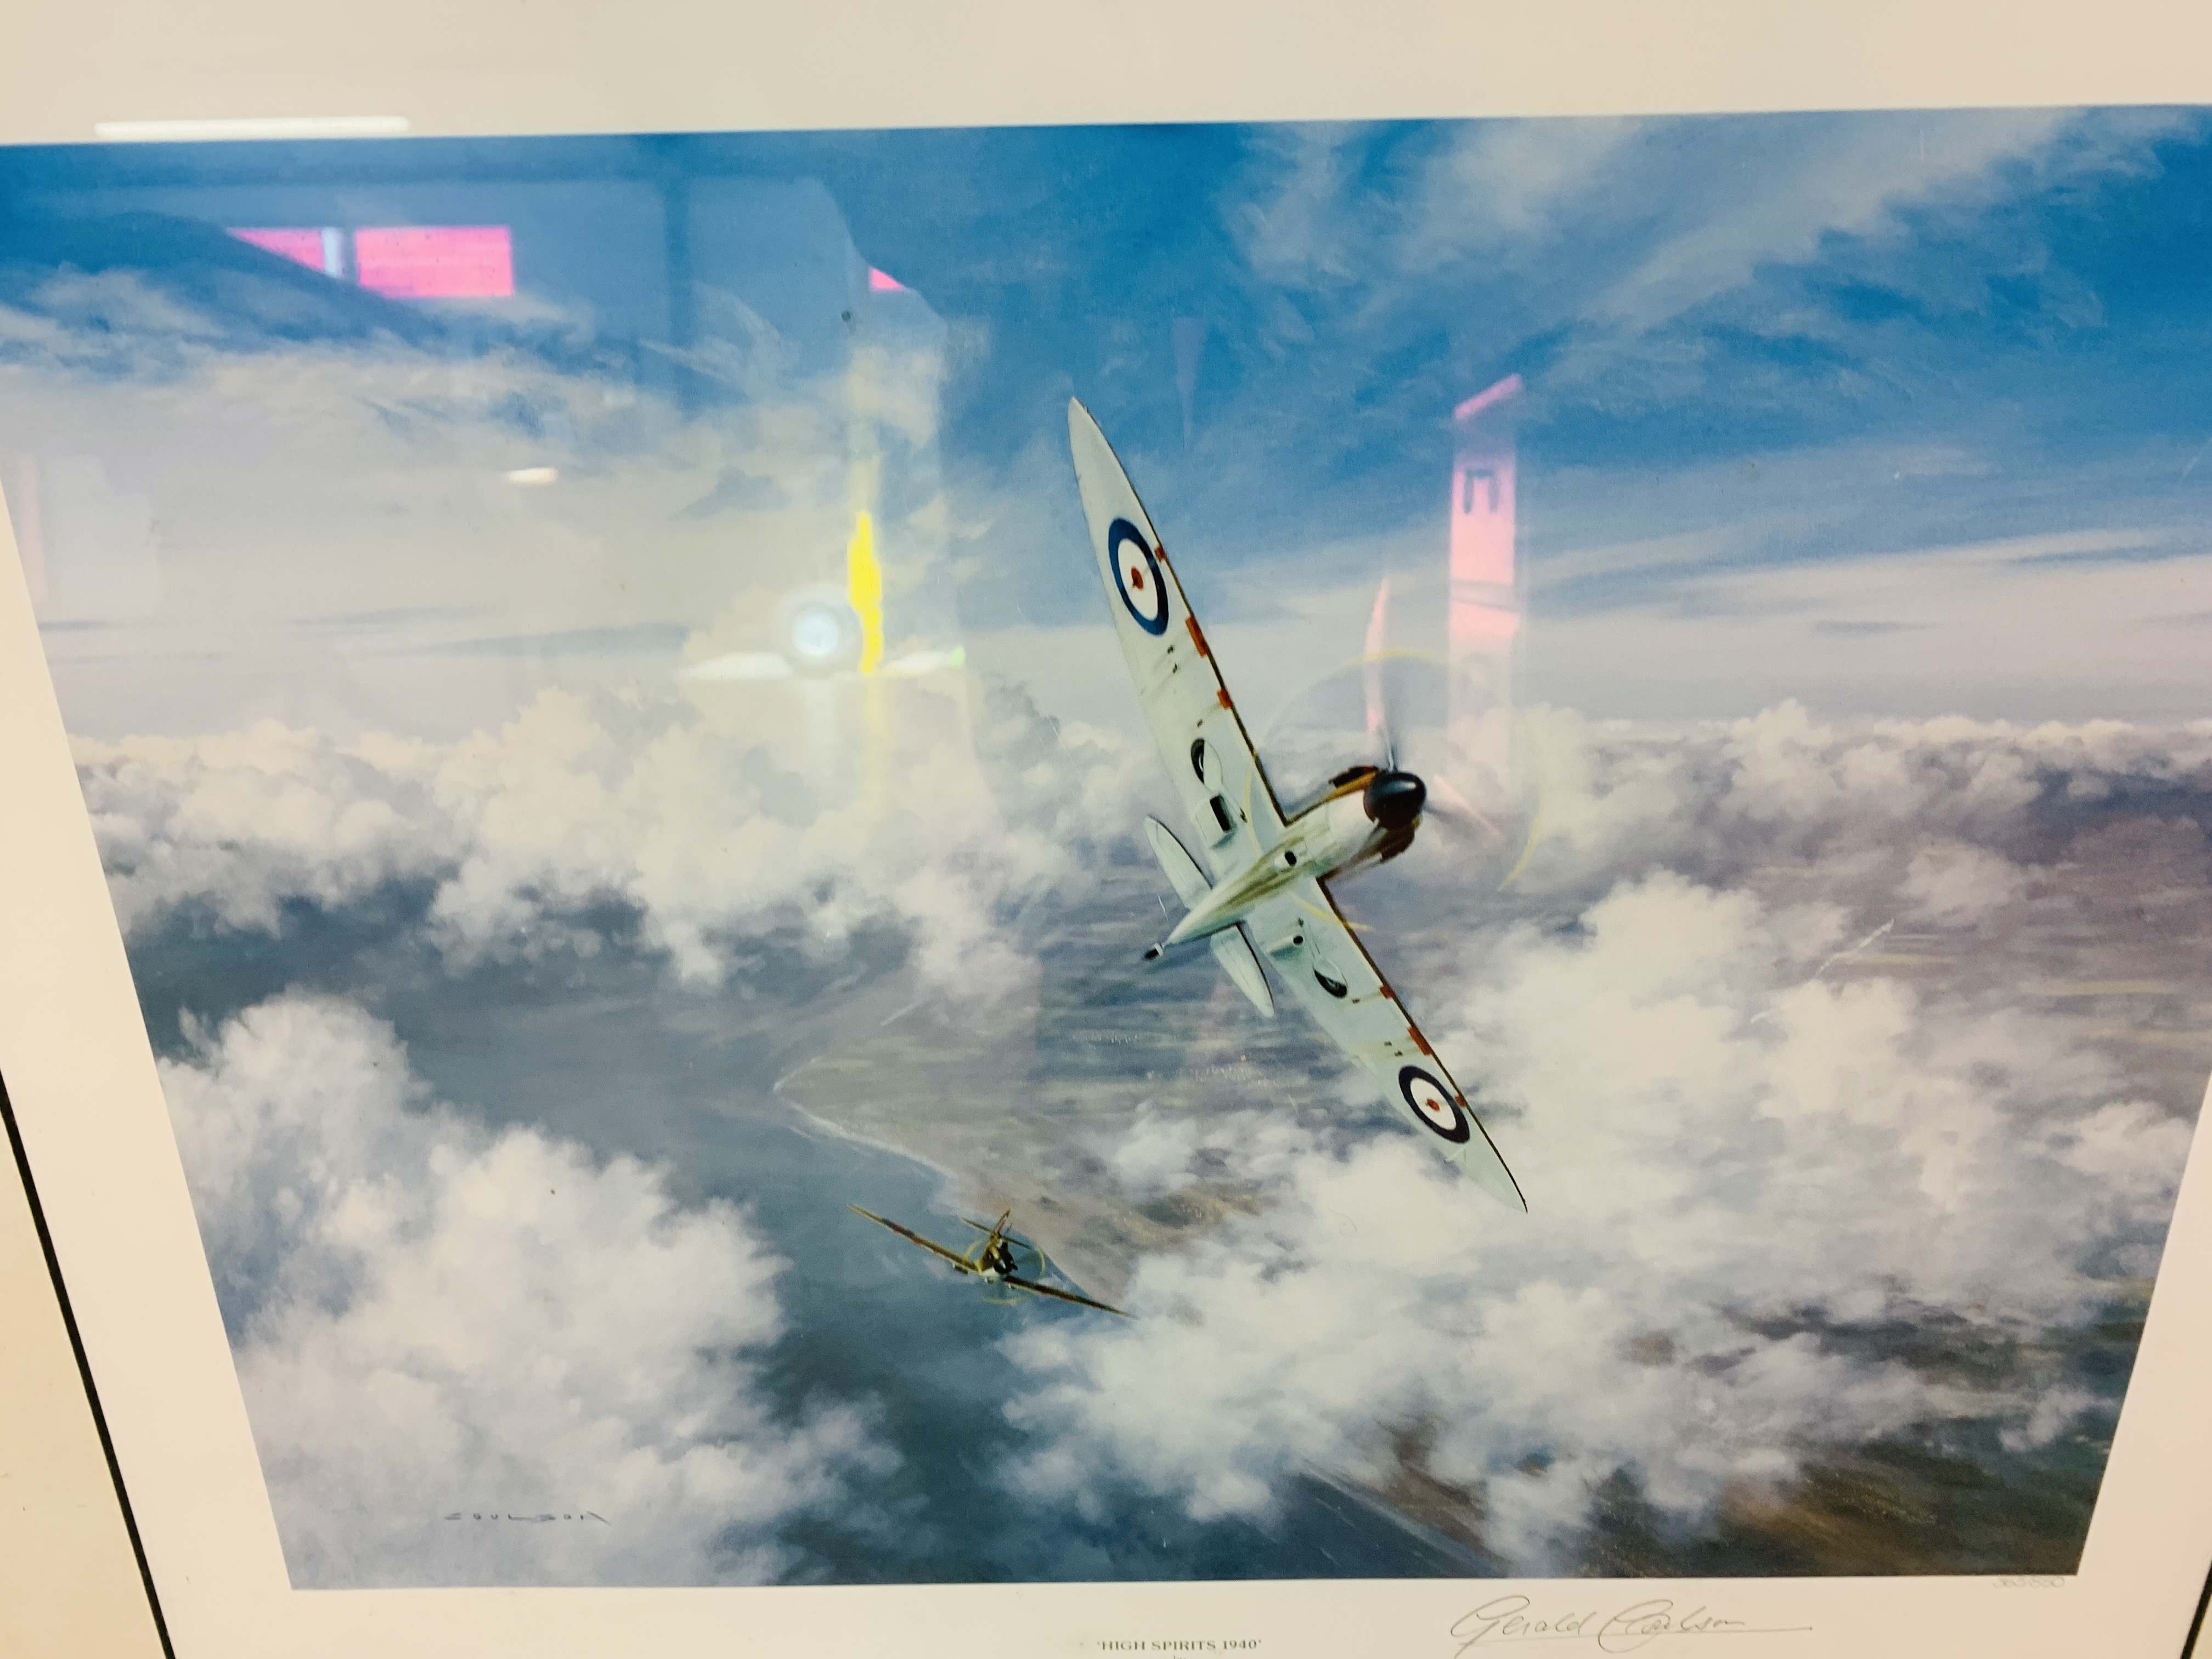 2 FRAMED AND MOUNTED FIGHTER PLANE PRINTS "HIGH SPIRITS" 1940, - Image 3 of 5